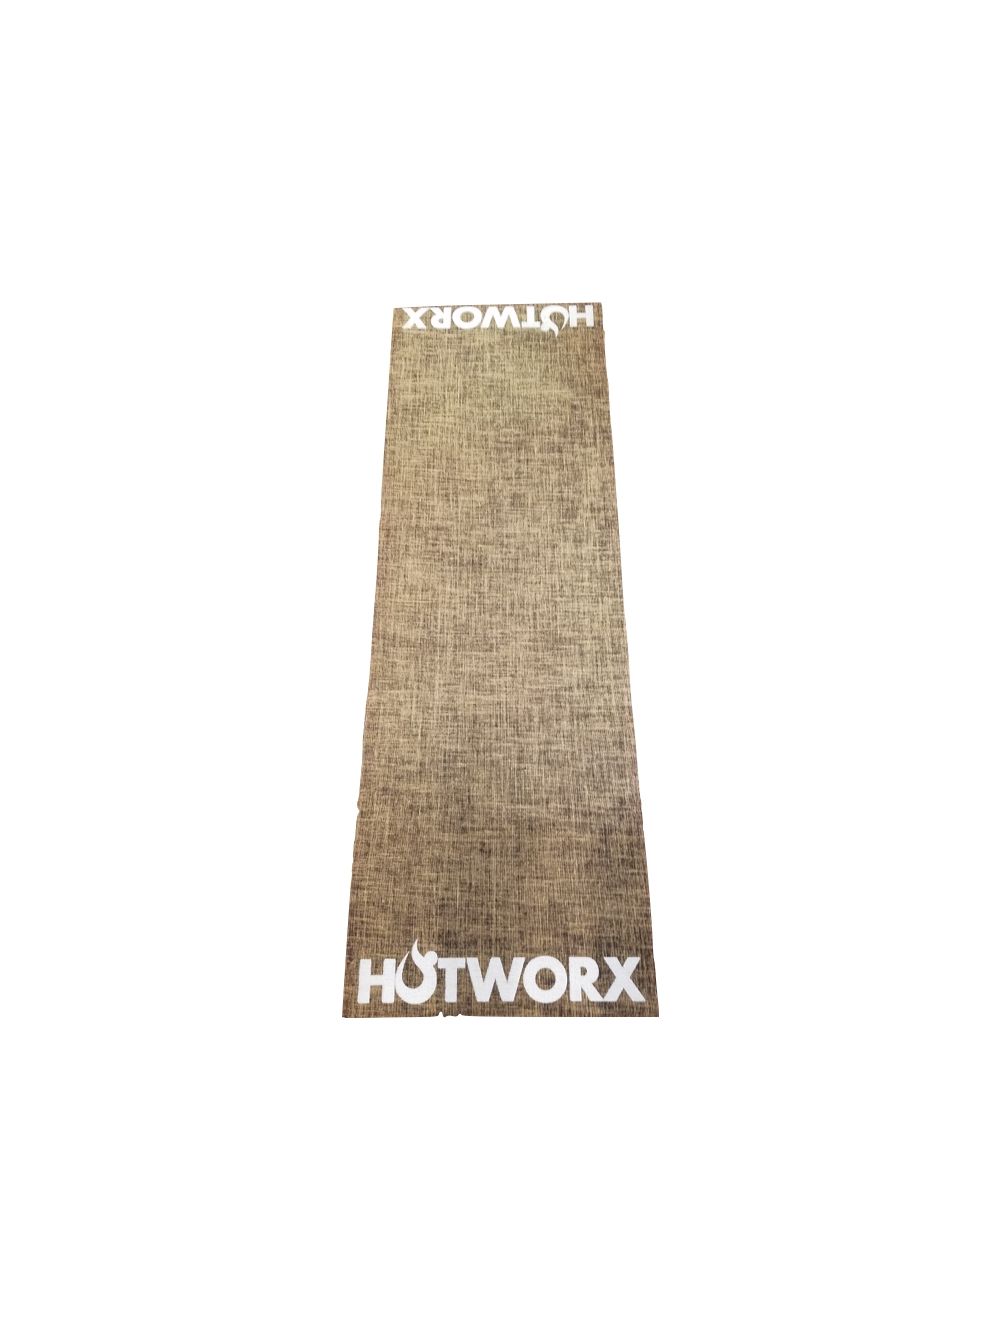 hotworx, Other, Hotworx Mat And Towel And Yoga Bag